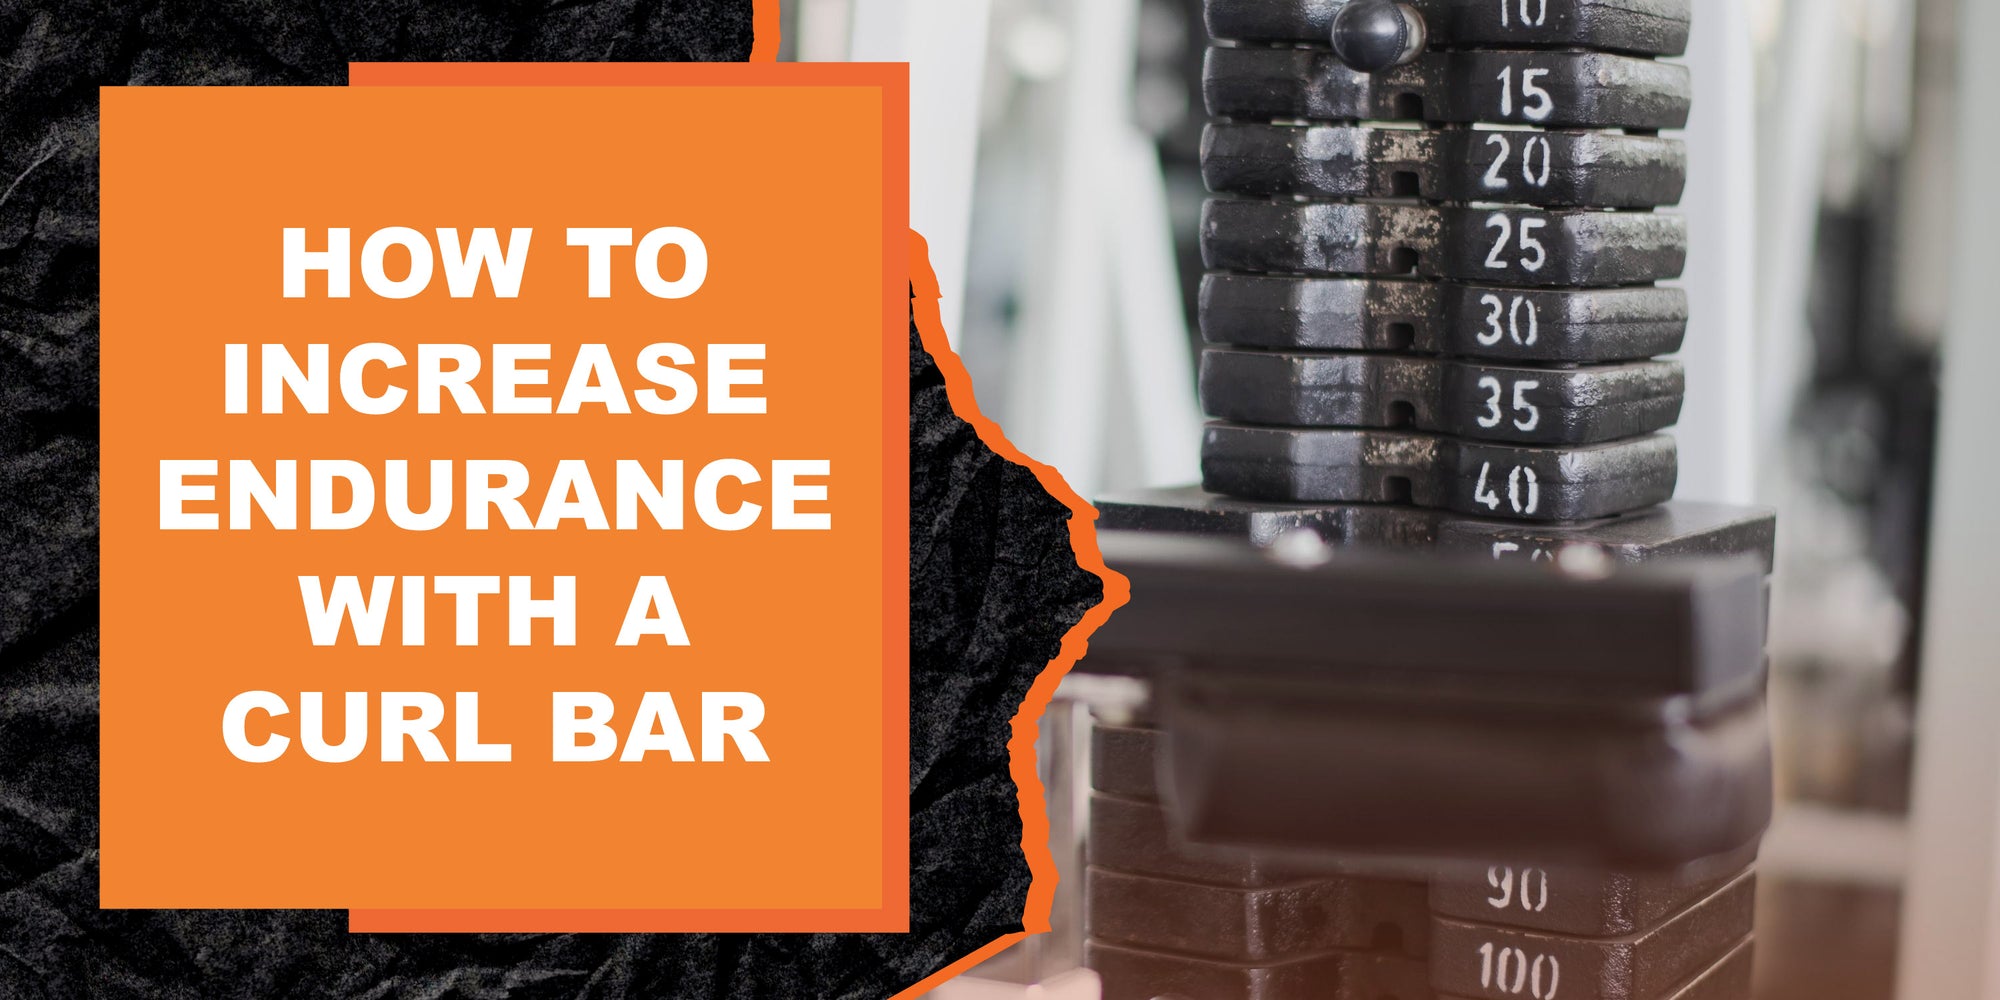 How to Increase Endurance with a Curl Bar